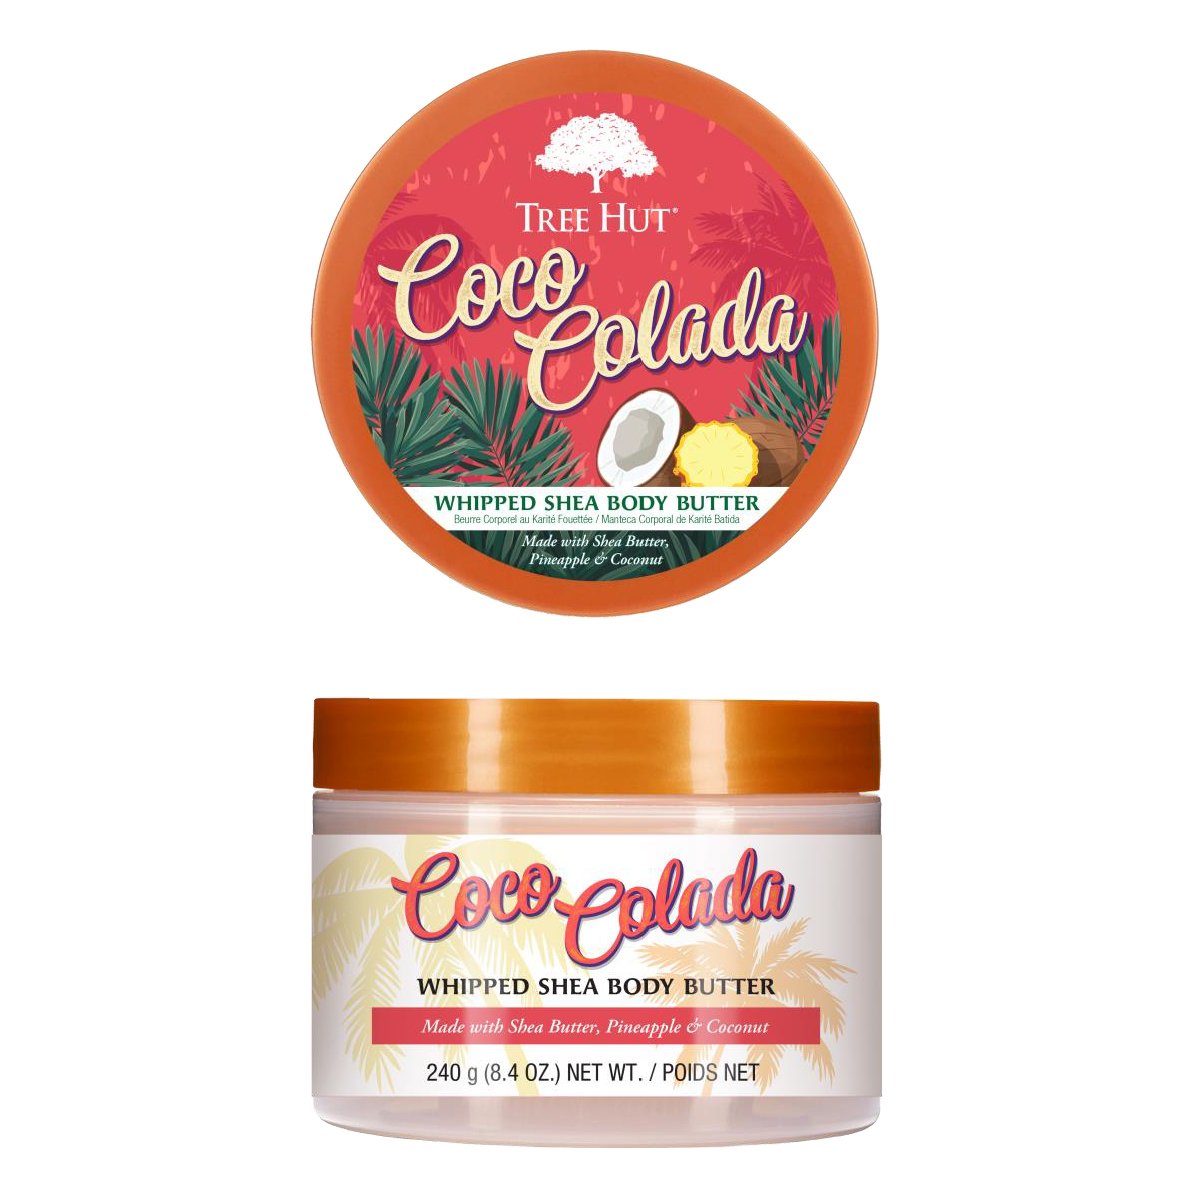 TREE HUT Whipped Body Butter Coco Colada 240g